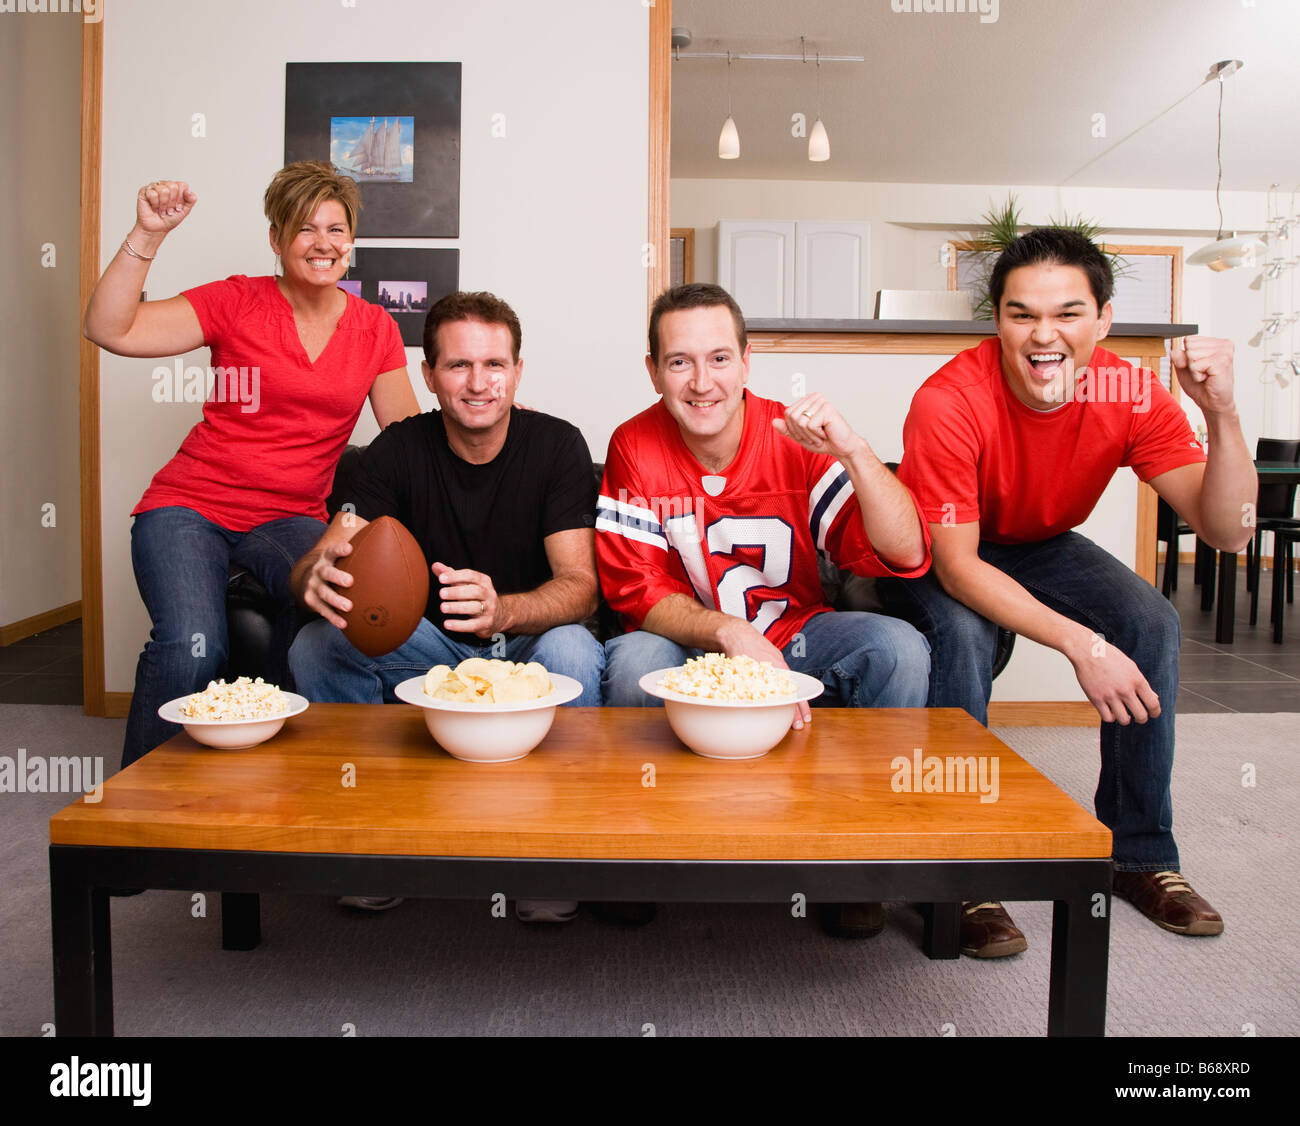 Four football fans cheering in living room Stock Photo